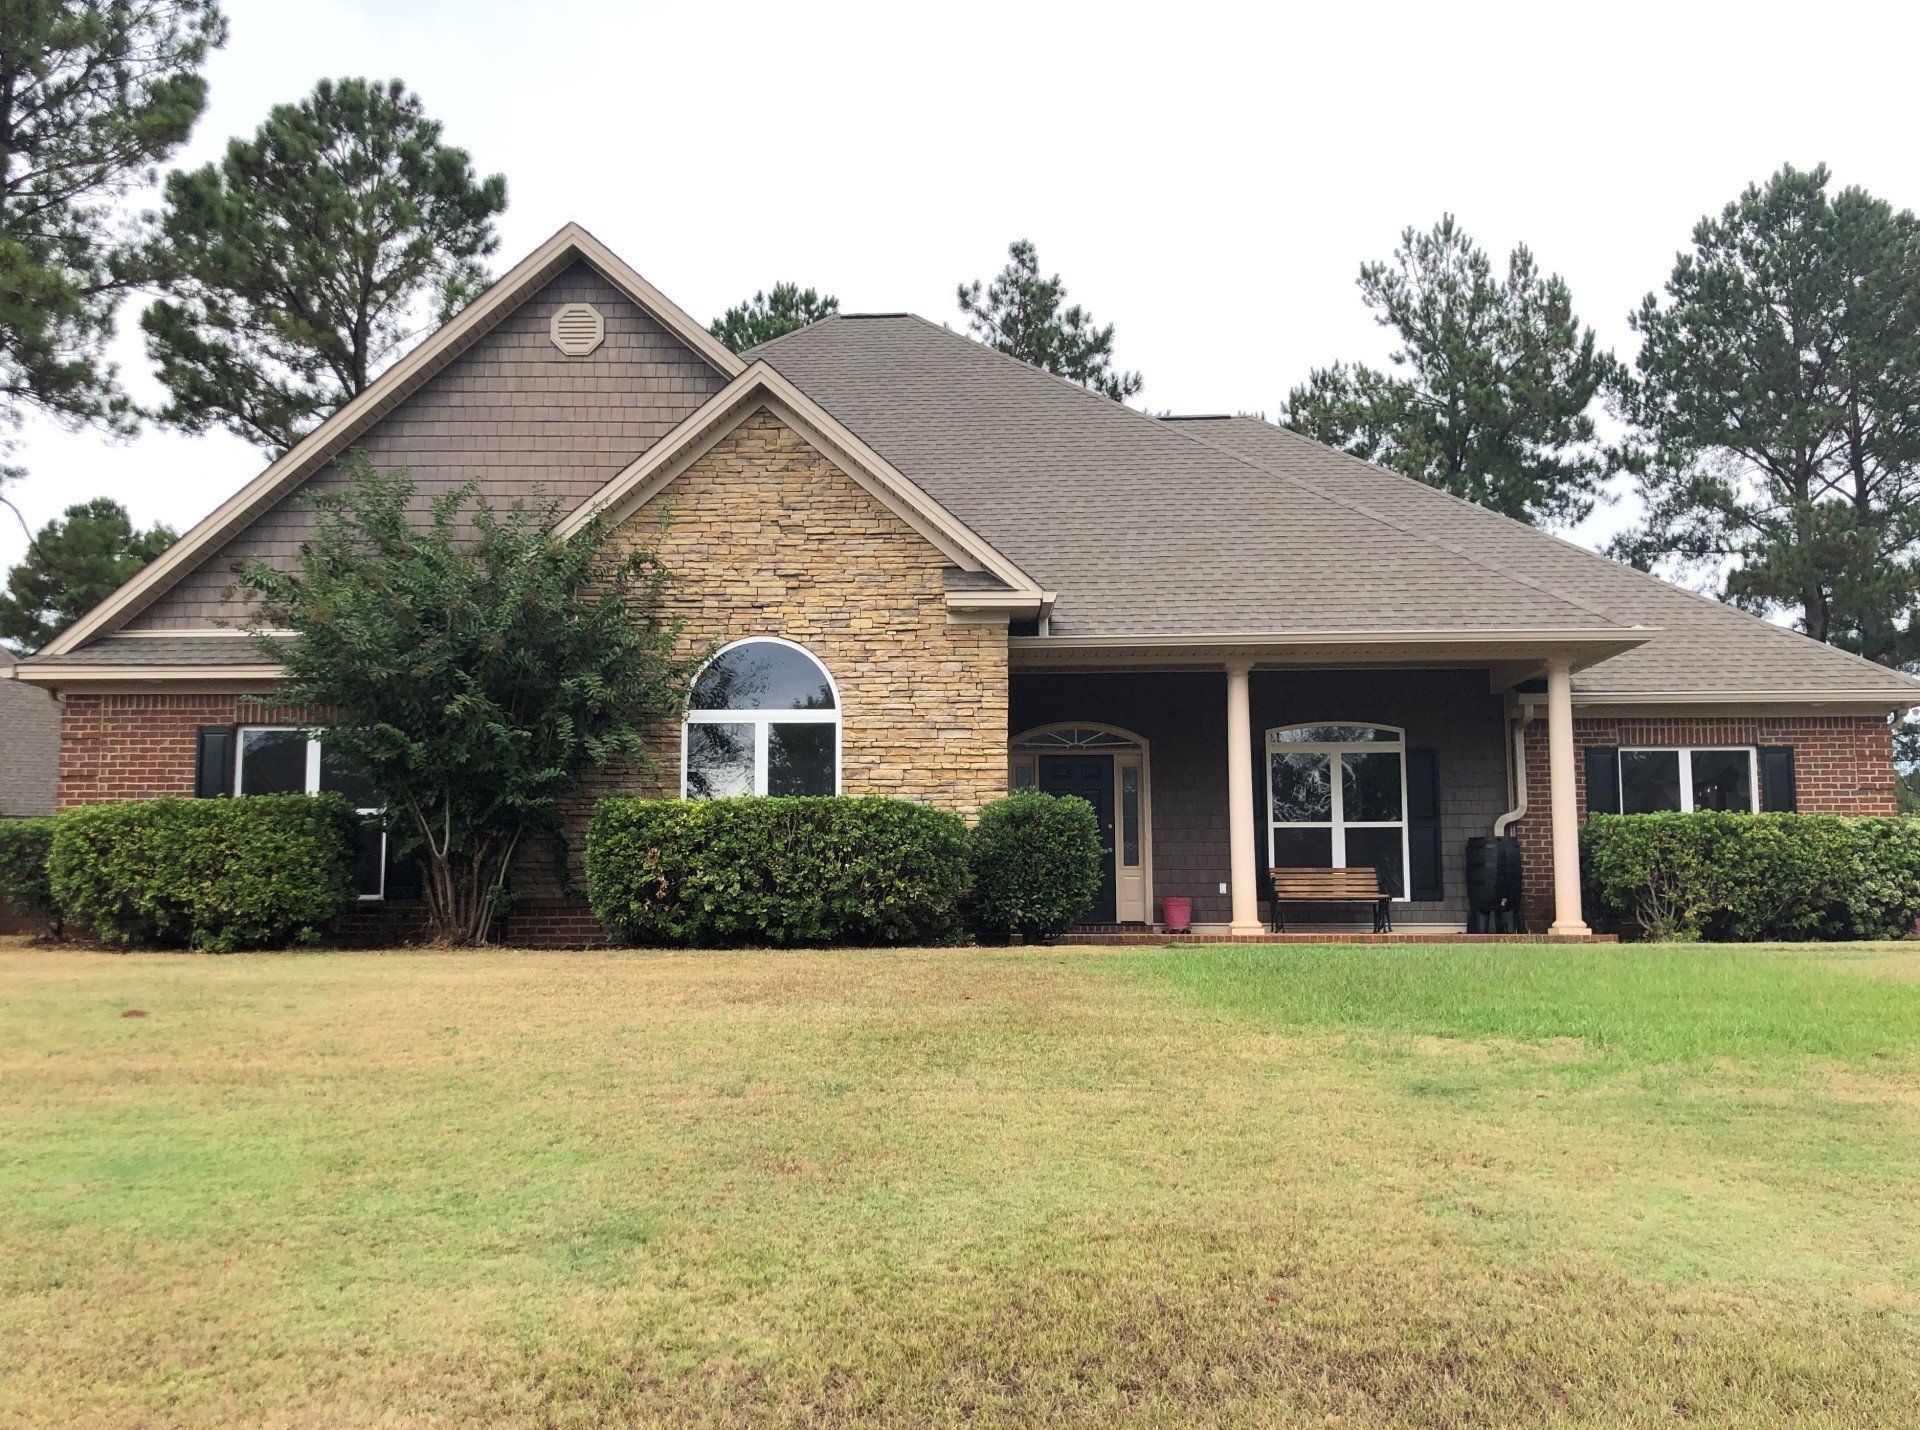 Best residential window efficiency in Wetumpka AL - Leading-performance SPF window tint installed eliminating bright UV Sun Glare from this Wetumpka AL